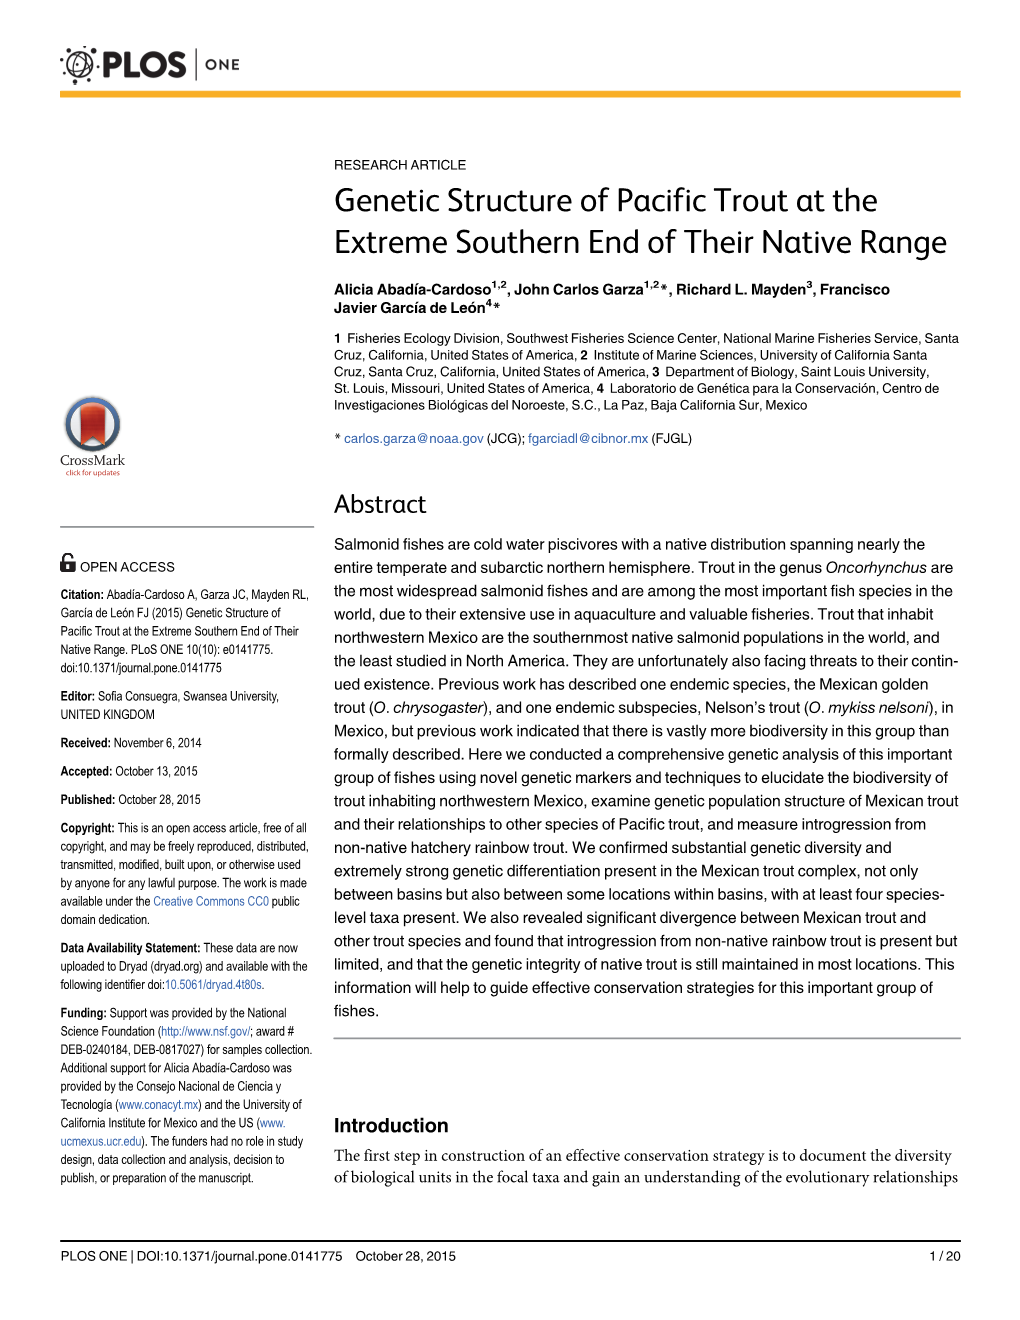 Genetic Structure of Pacific Trout at the Extreme Southern End of Their Native Range